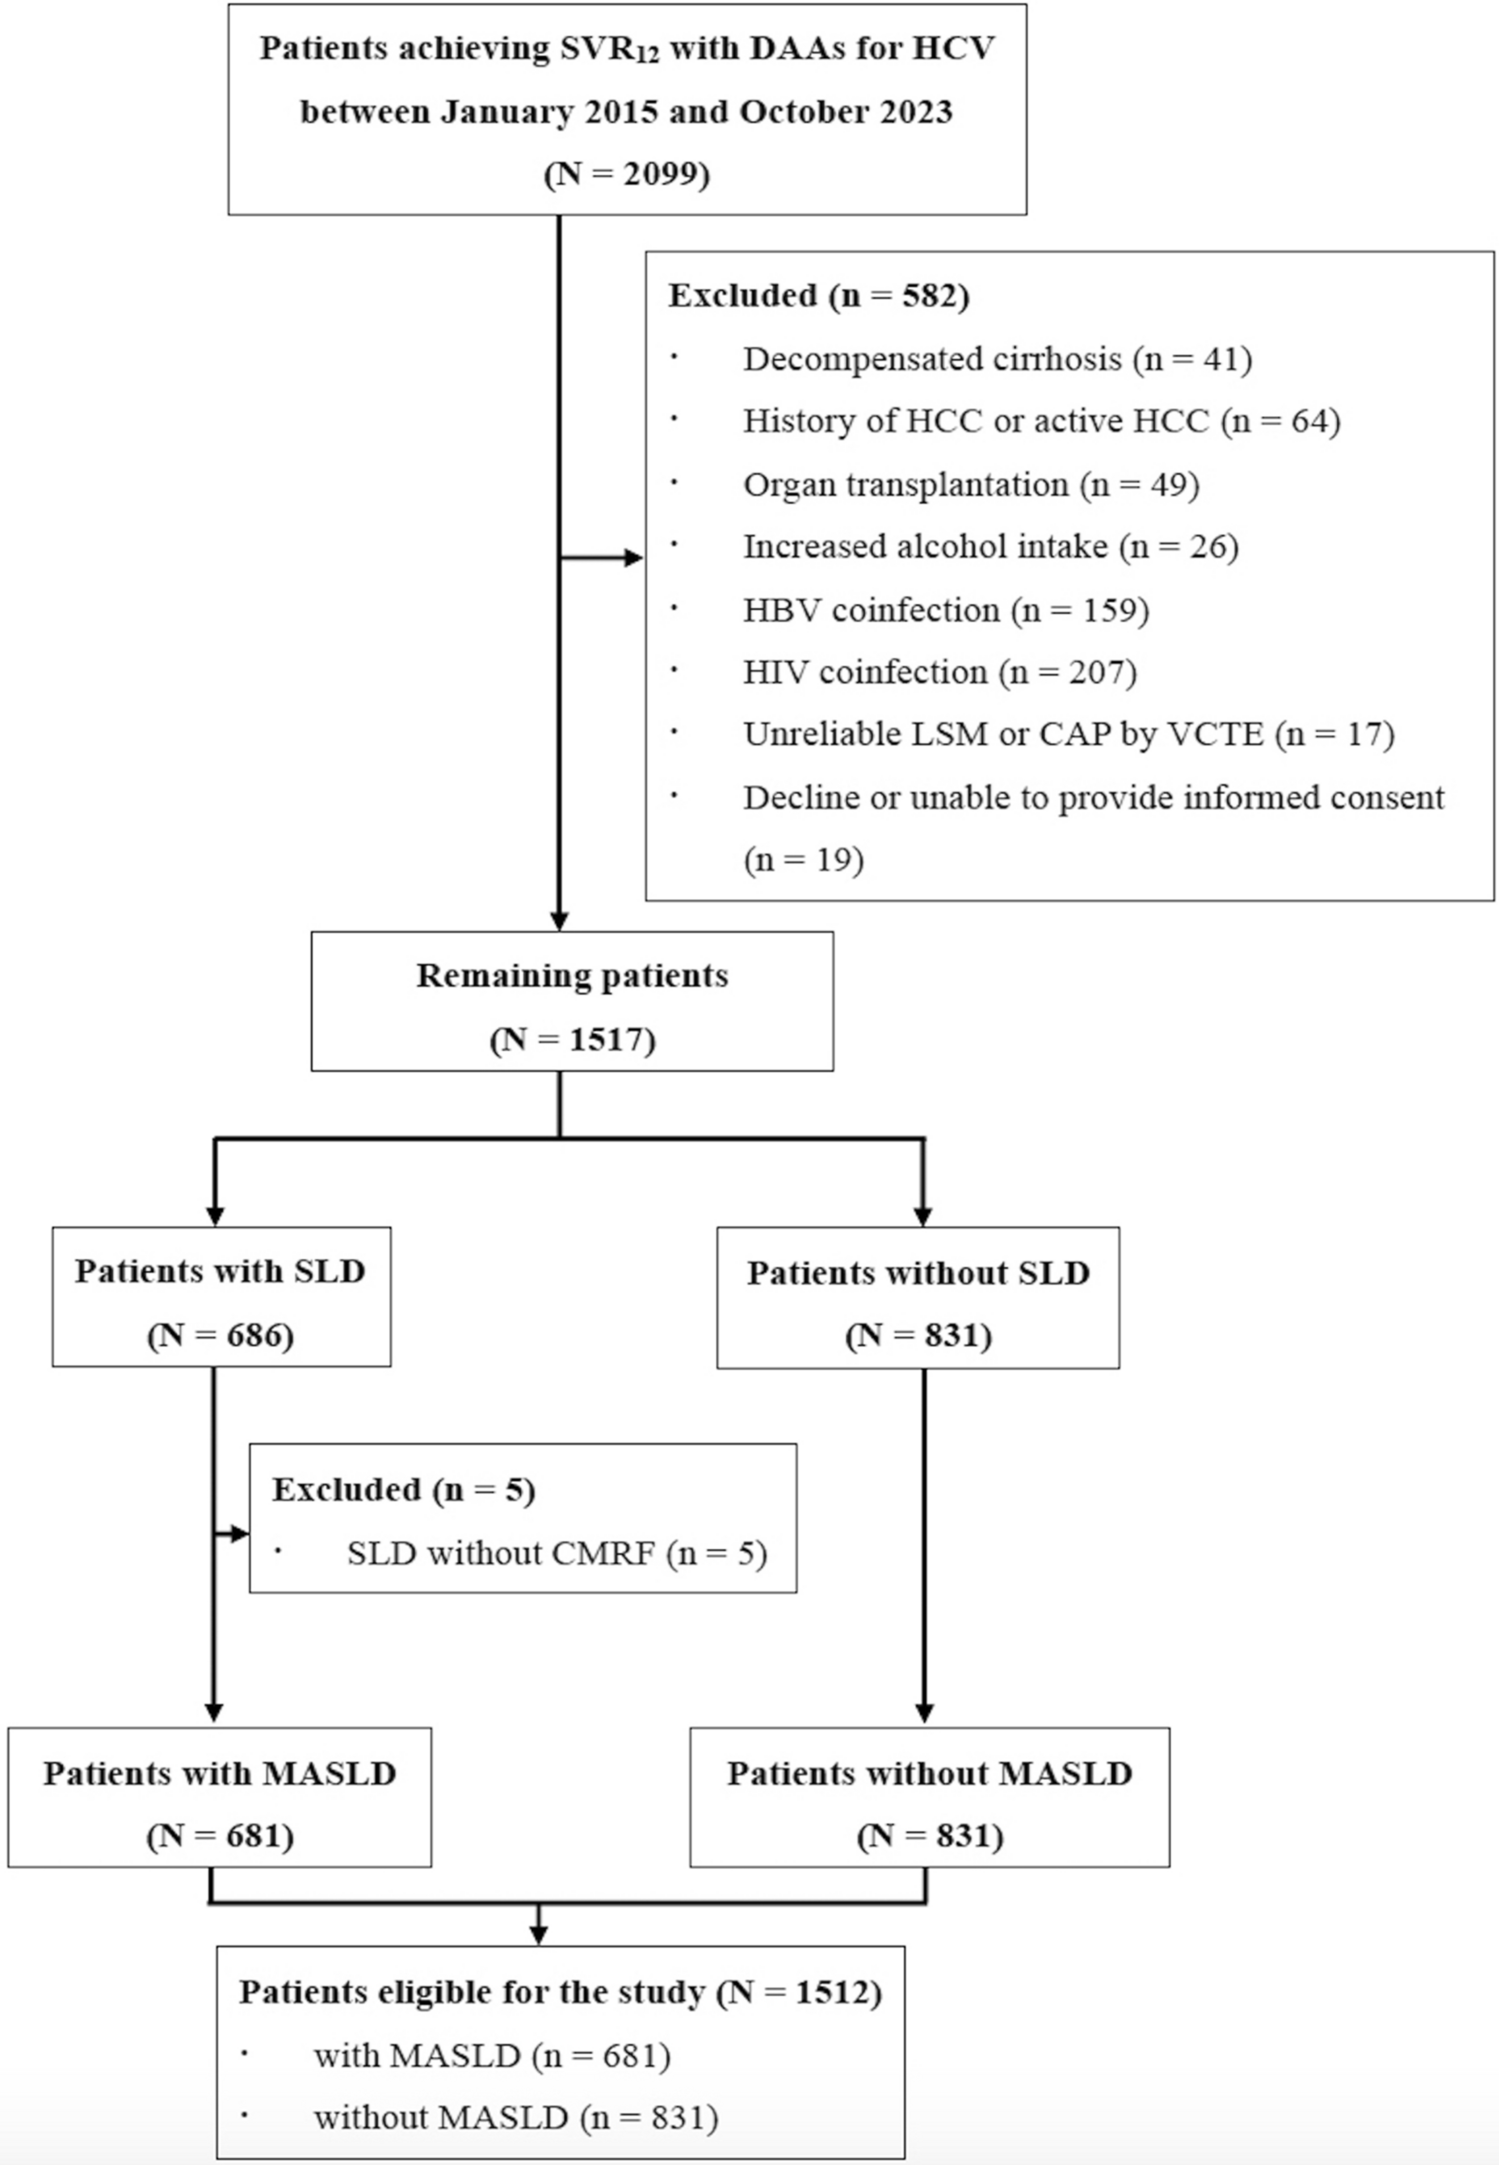 Dynamic change of metabolic dysfunction-associated steatotic liver disease in patients with hepatitis C virus infection after achieving sustained virologic response with direct-acting antivirals